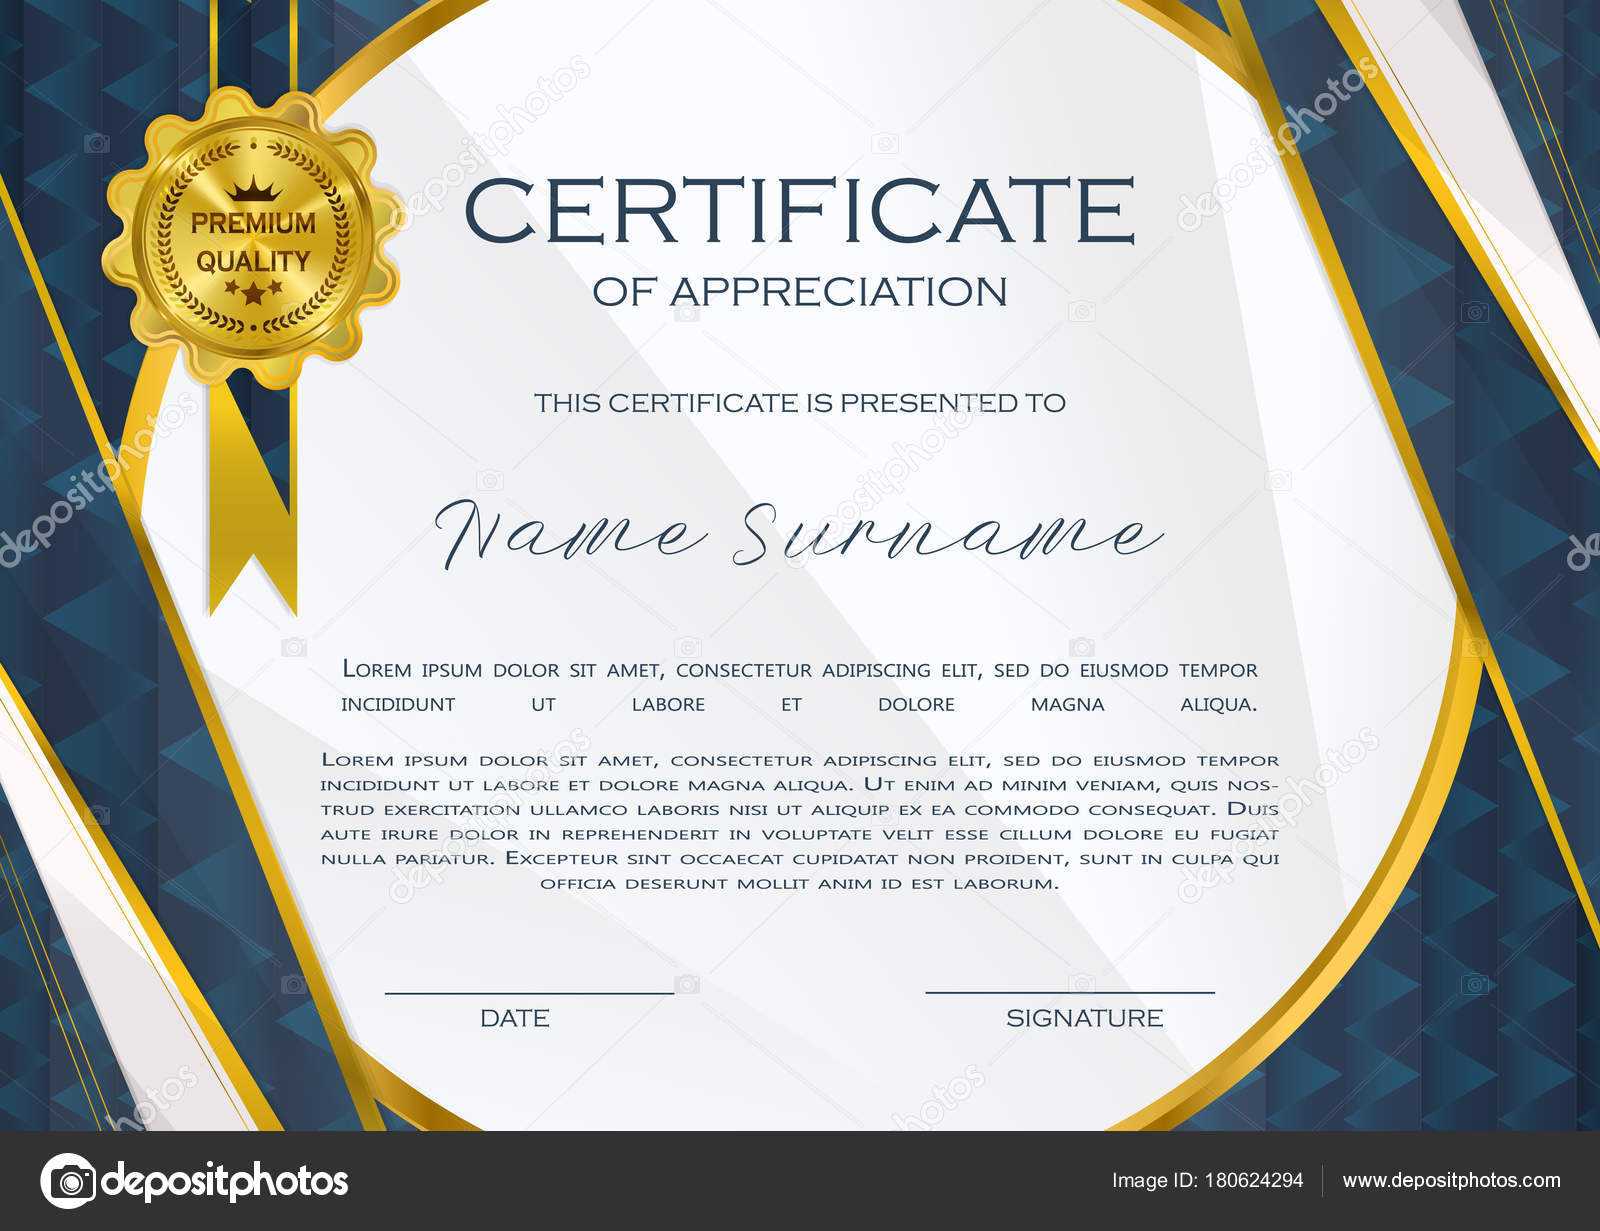 Qualification Certificate Appreciation Design Elegant Luxury With High Resolution Certificate Template